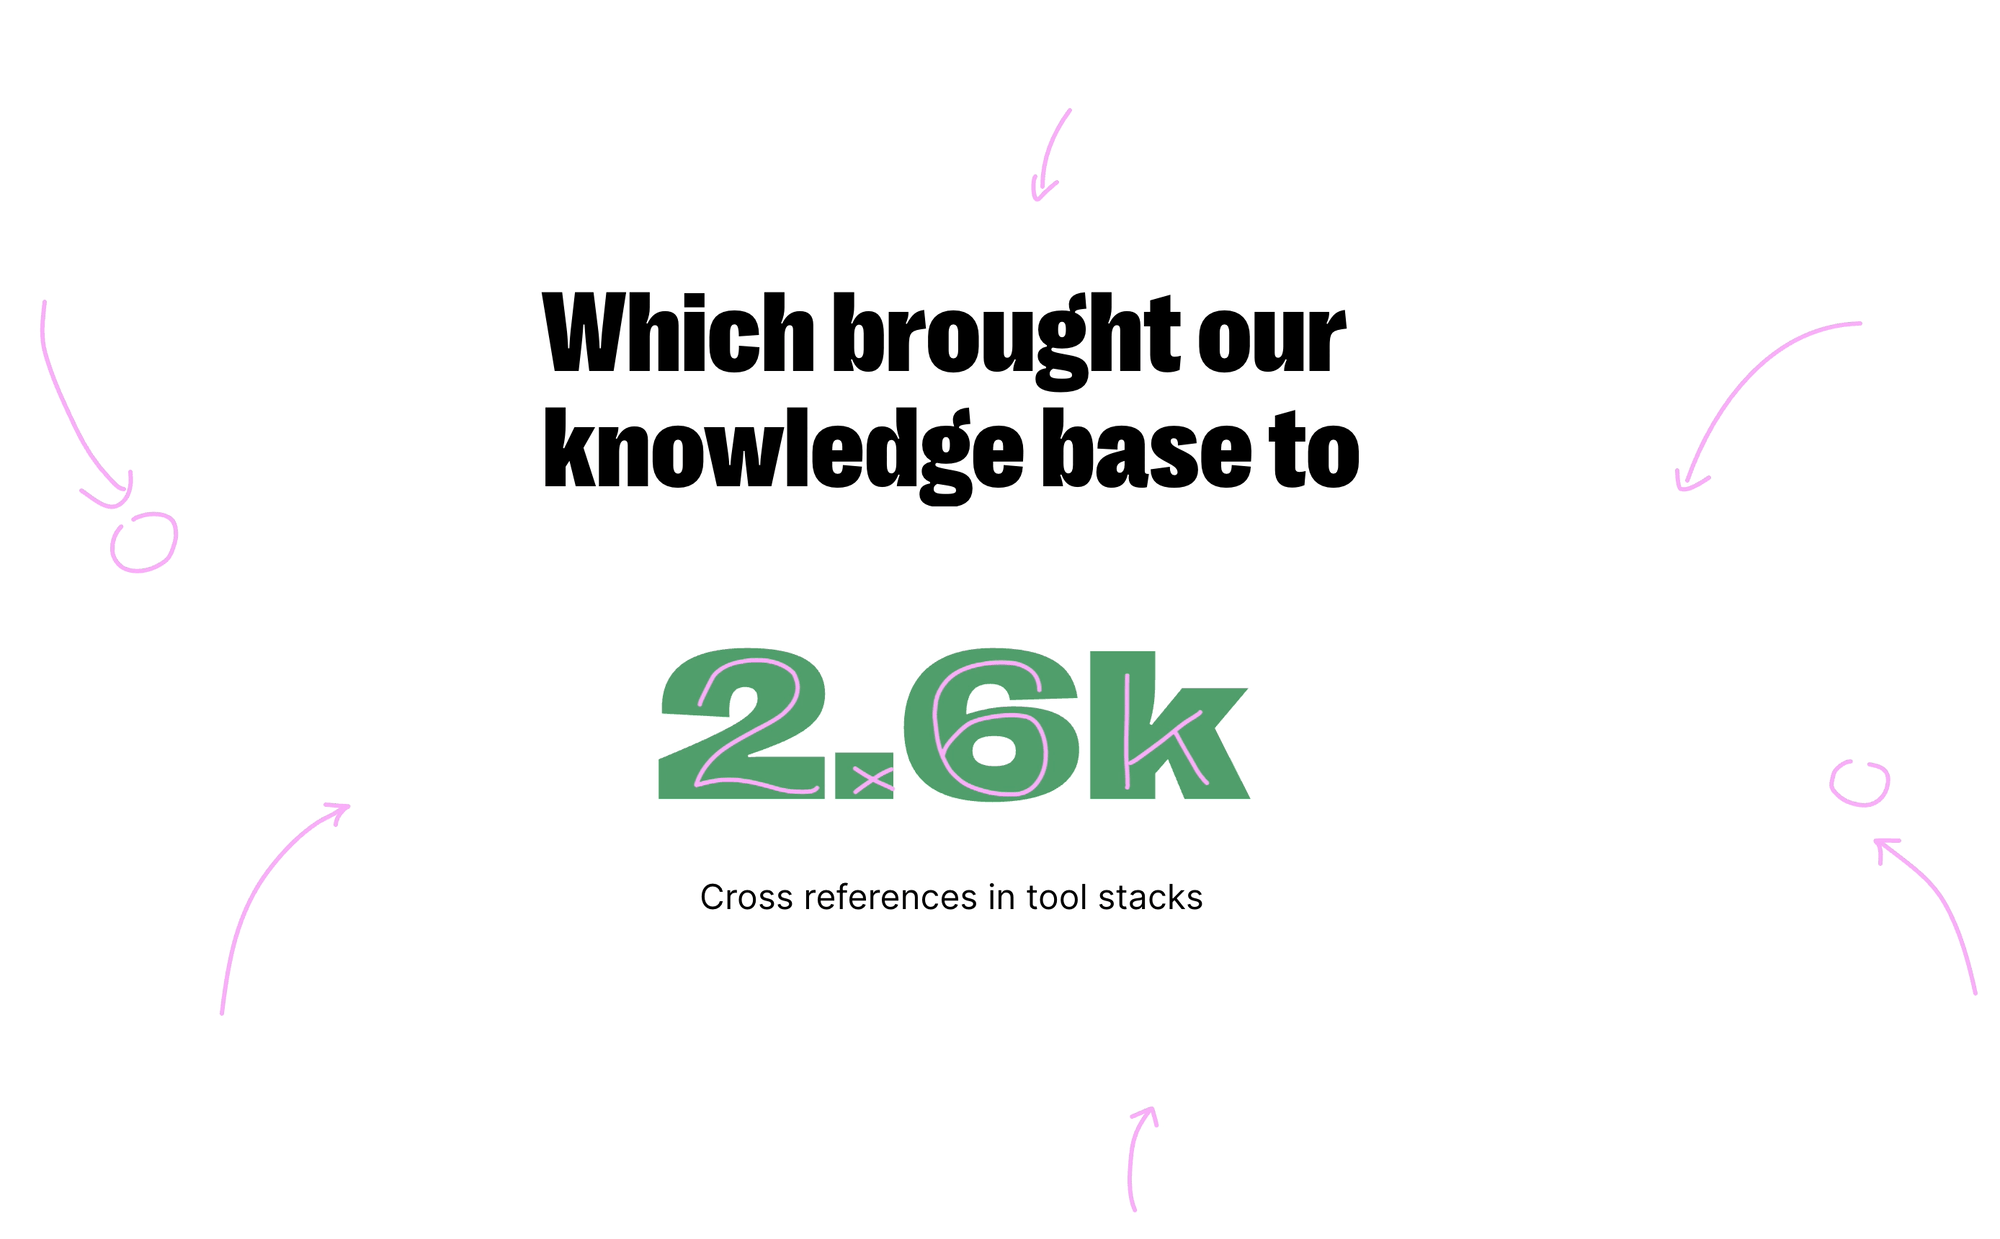 Size of the knowledge base